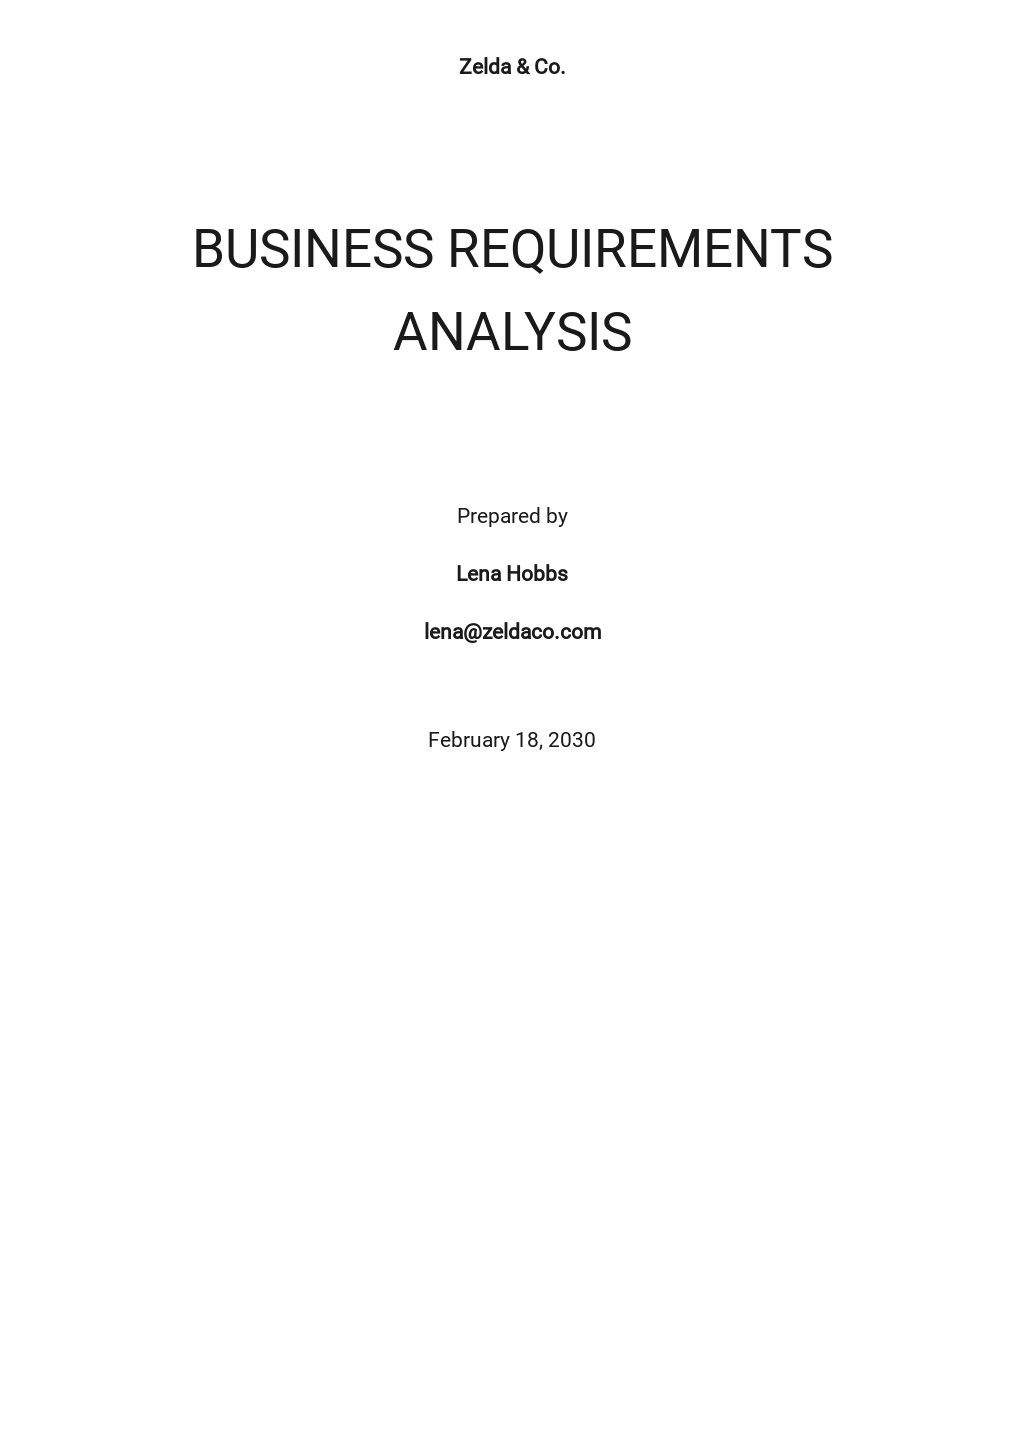 Business Requirements Analysis Template.jpe